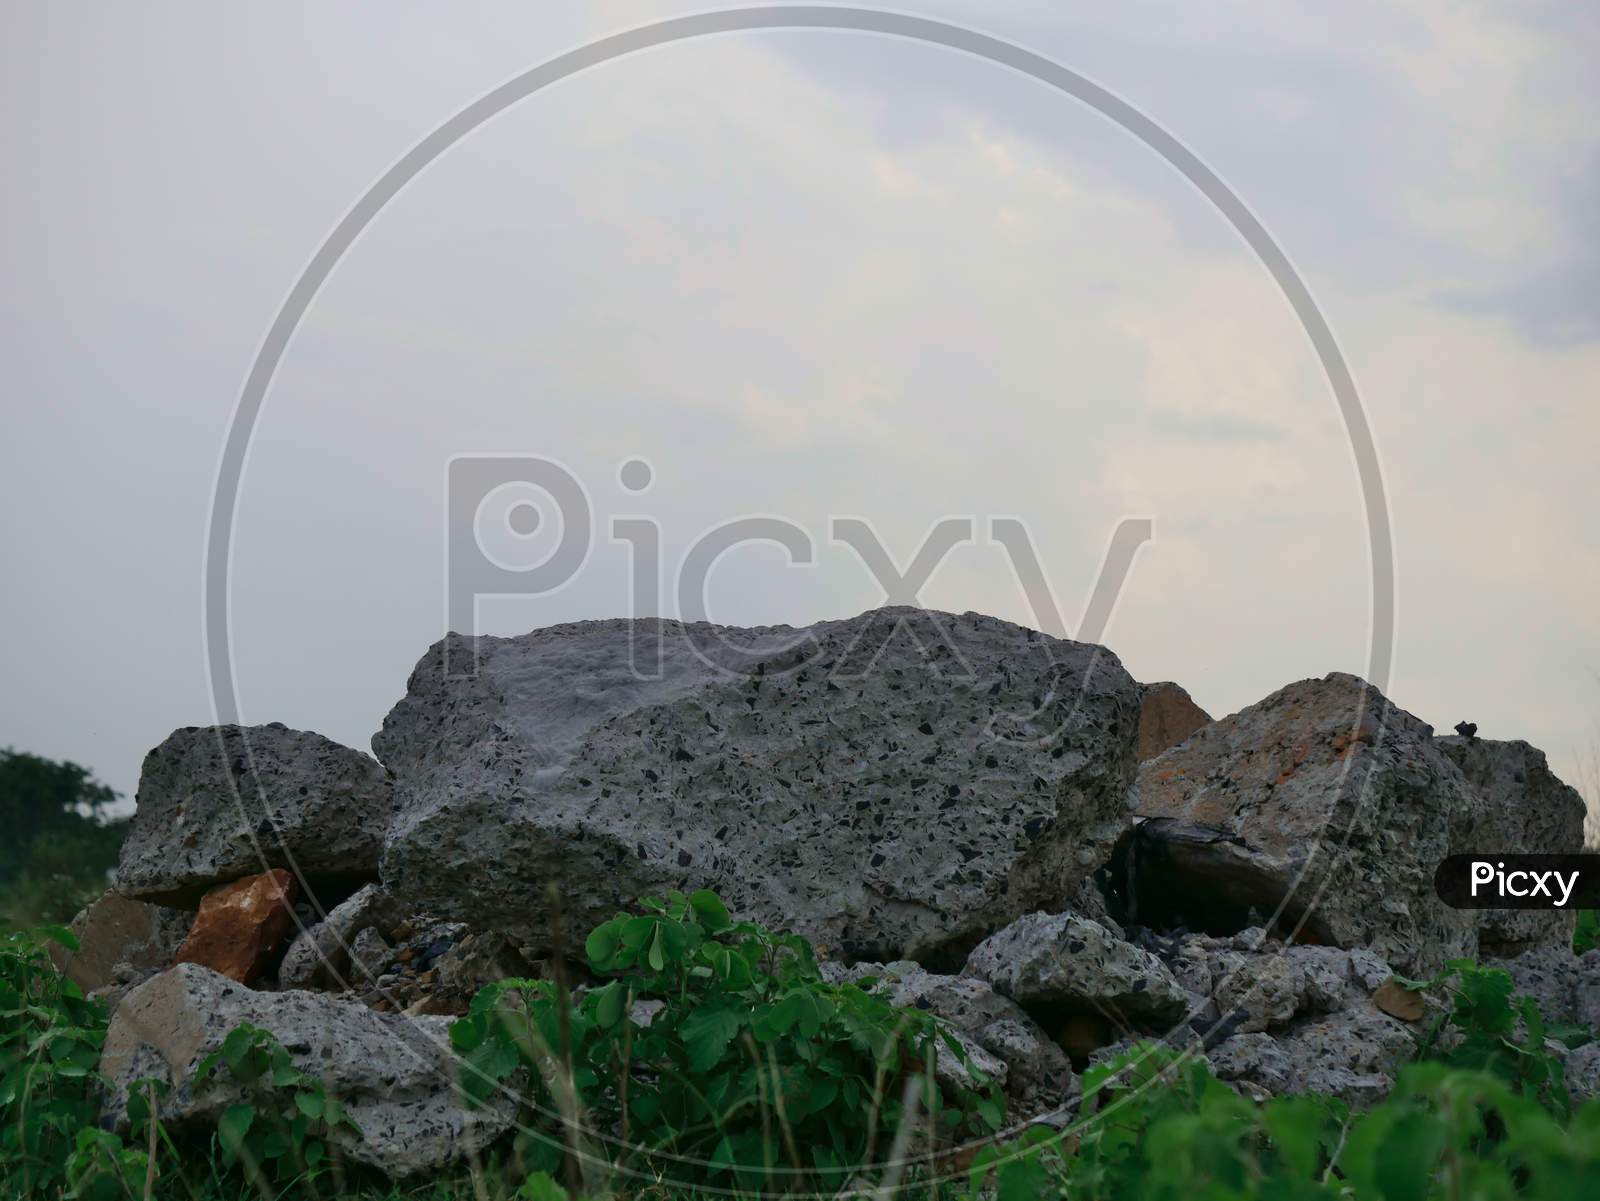 Concrete Waste Material Kept At Grass Field At Sky On Background.